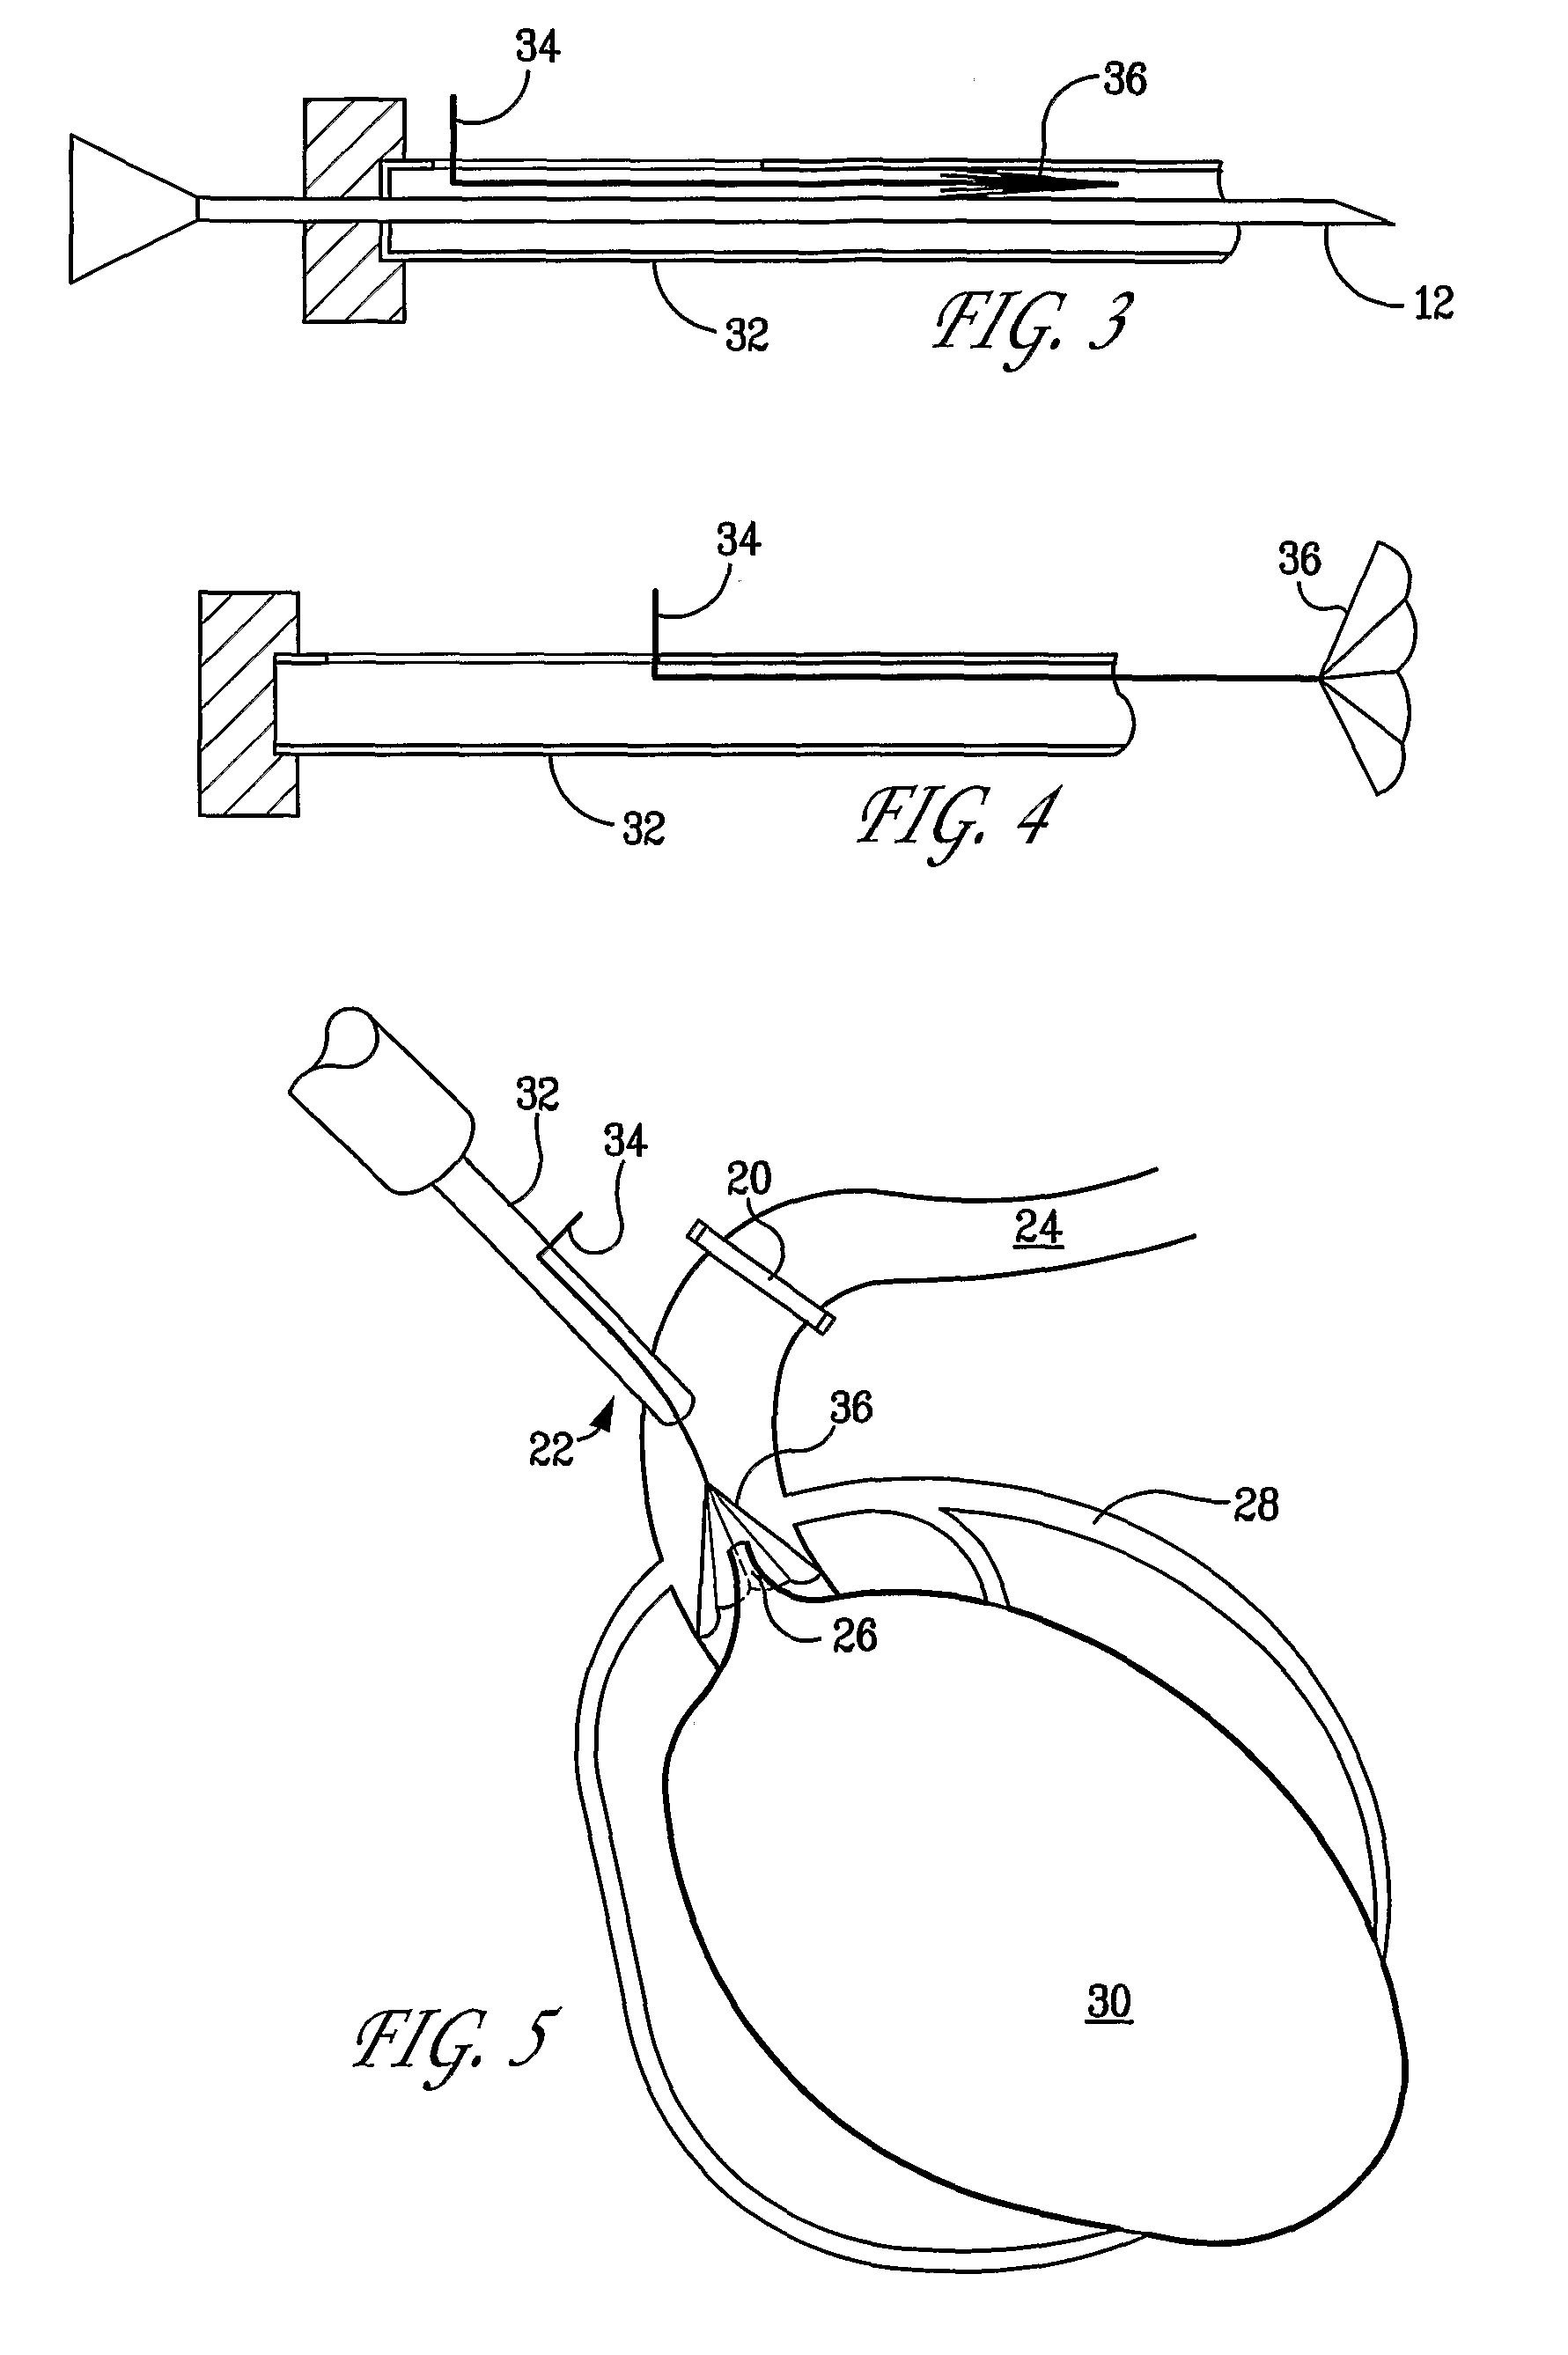 Device for facilitating cardioplegia delivery in patients with aortic insufficiency